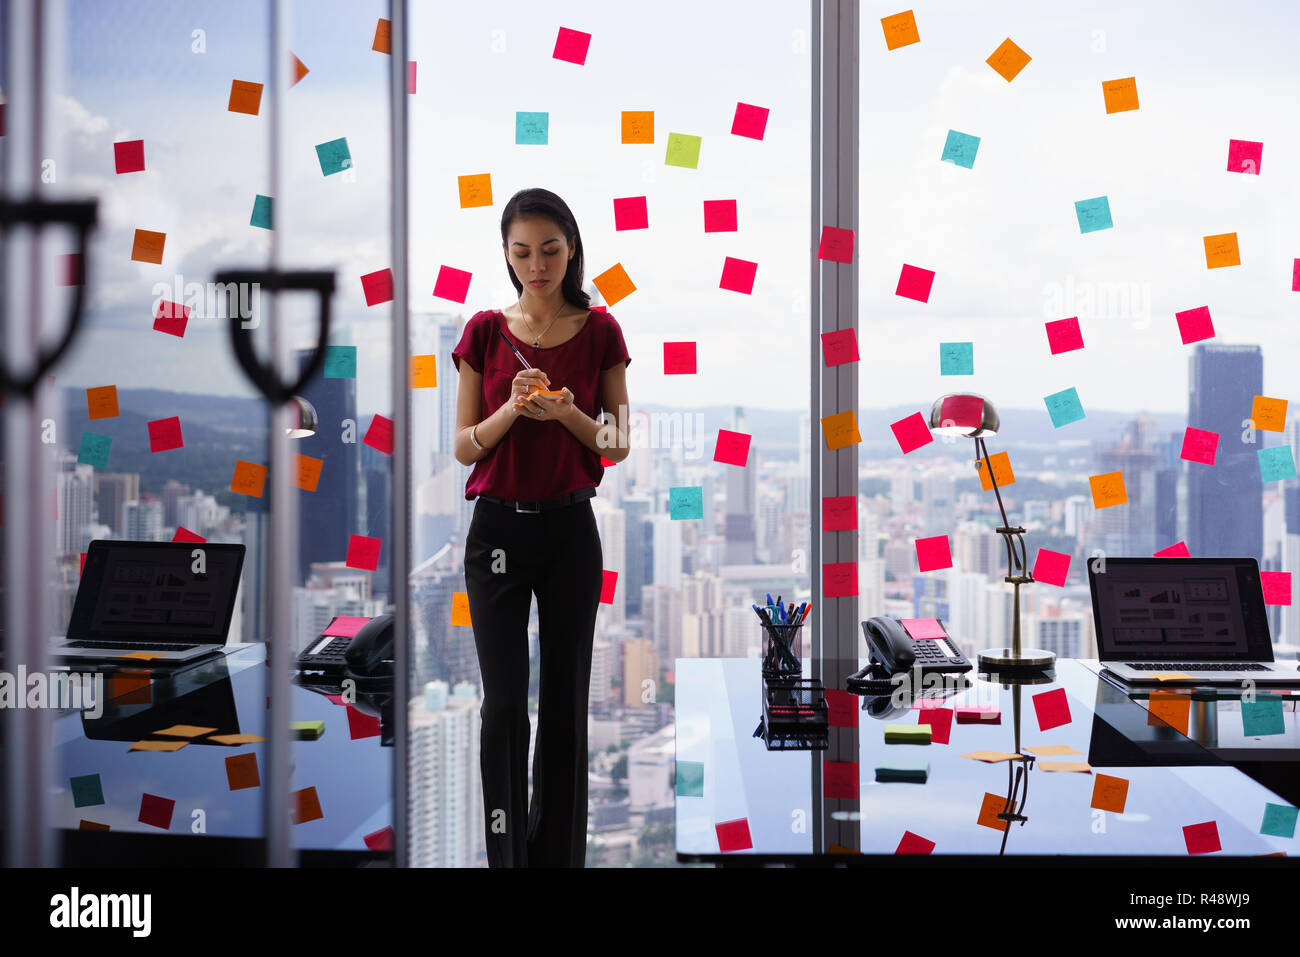 Busy Person Writing Many Sticky Notes On Large Window Stock Photo